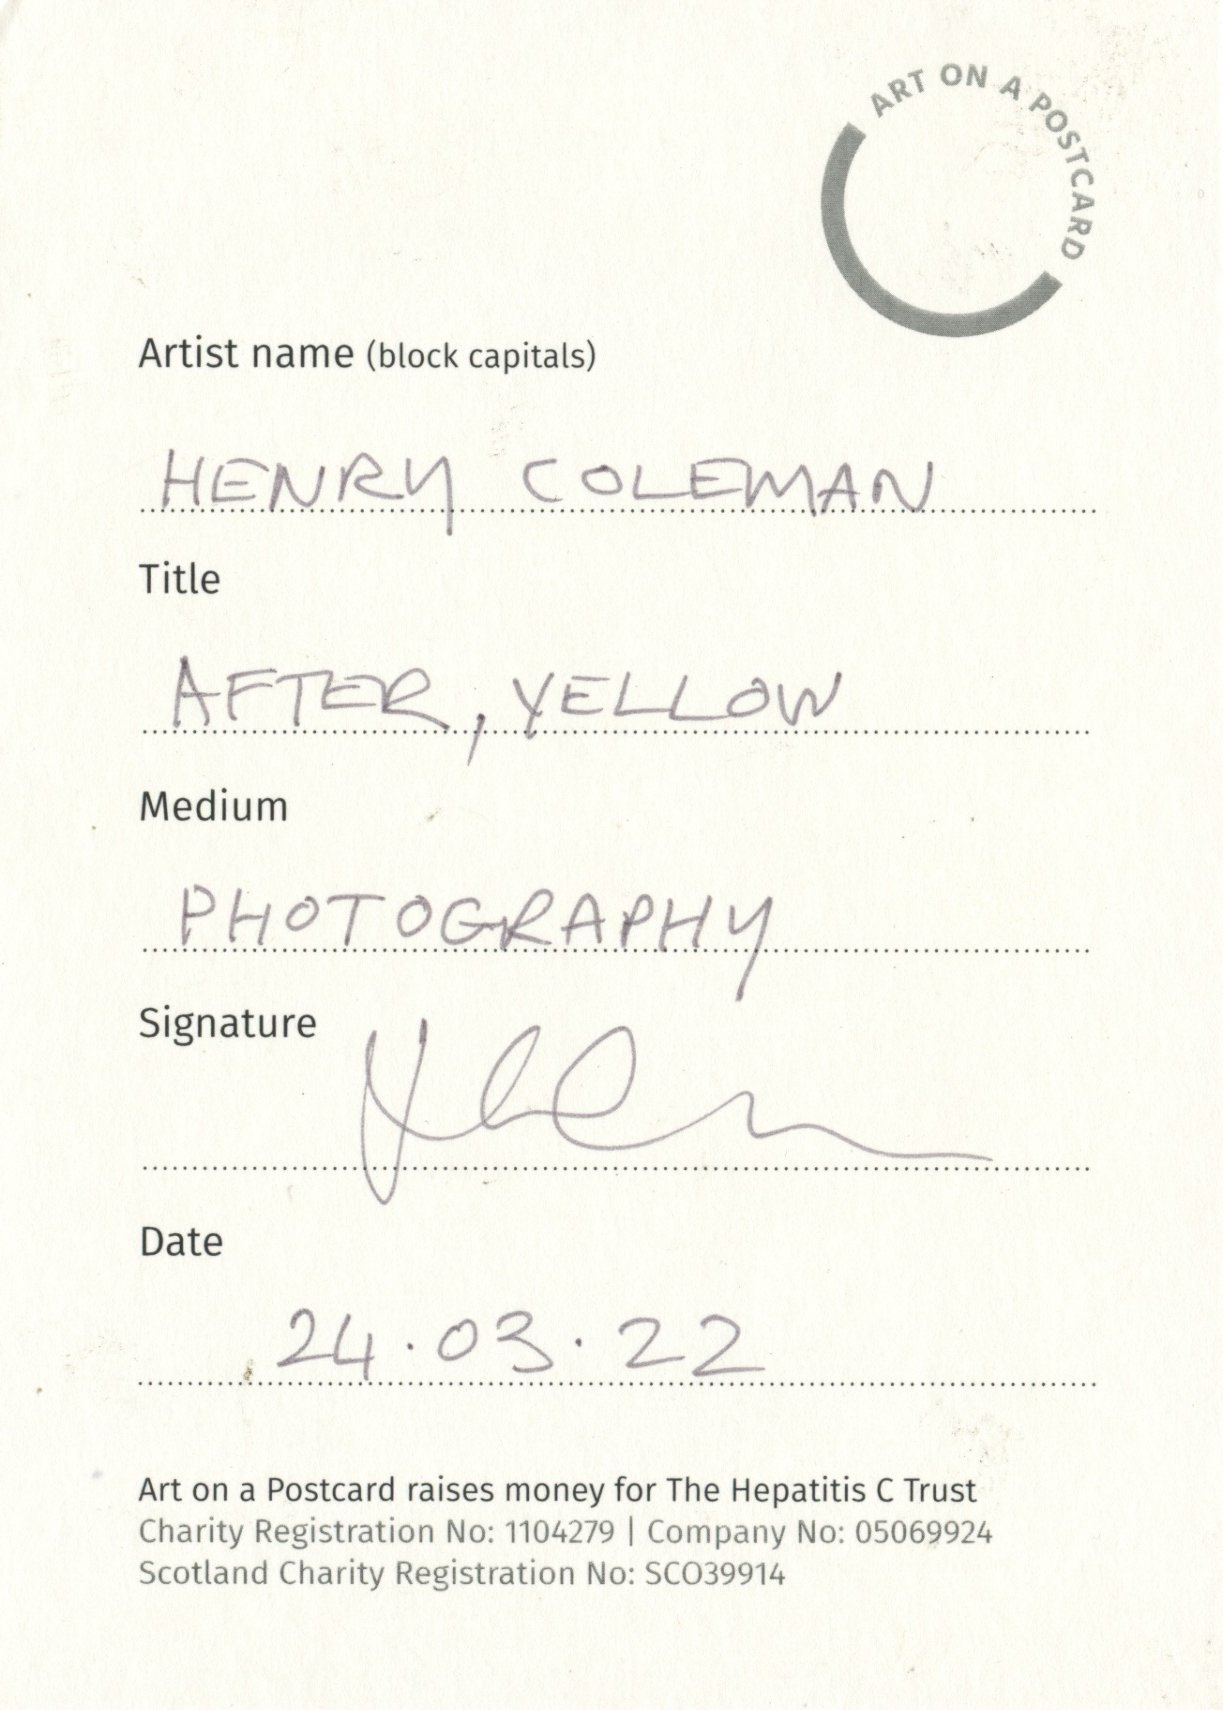 52. Henry Coleman - After, Yellow - BACK